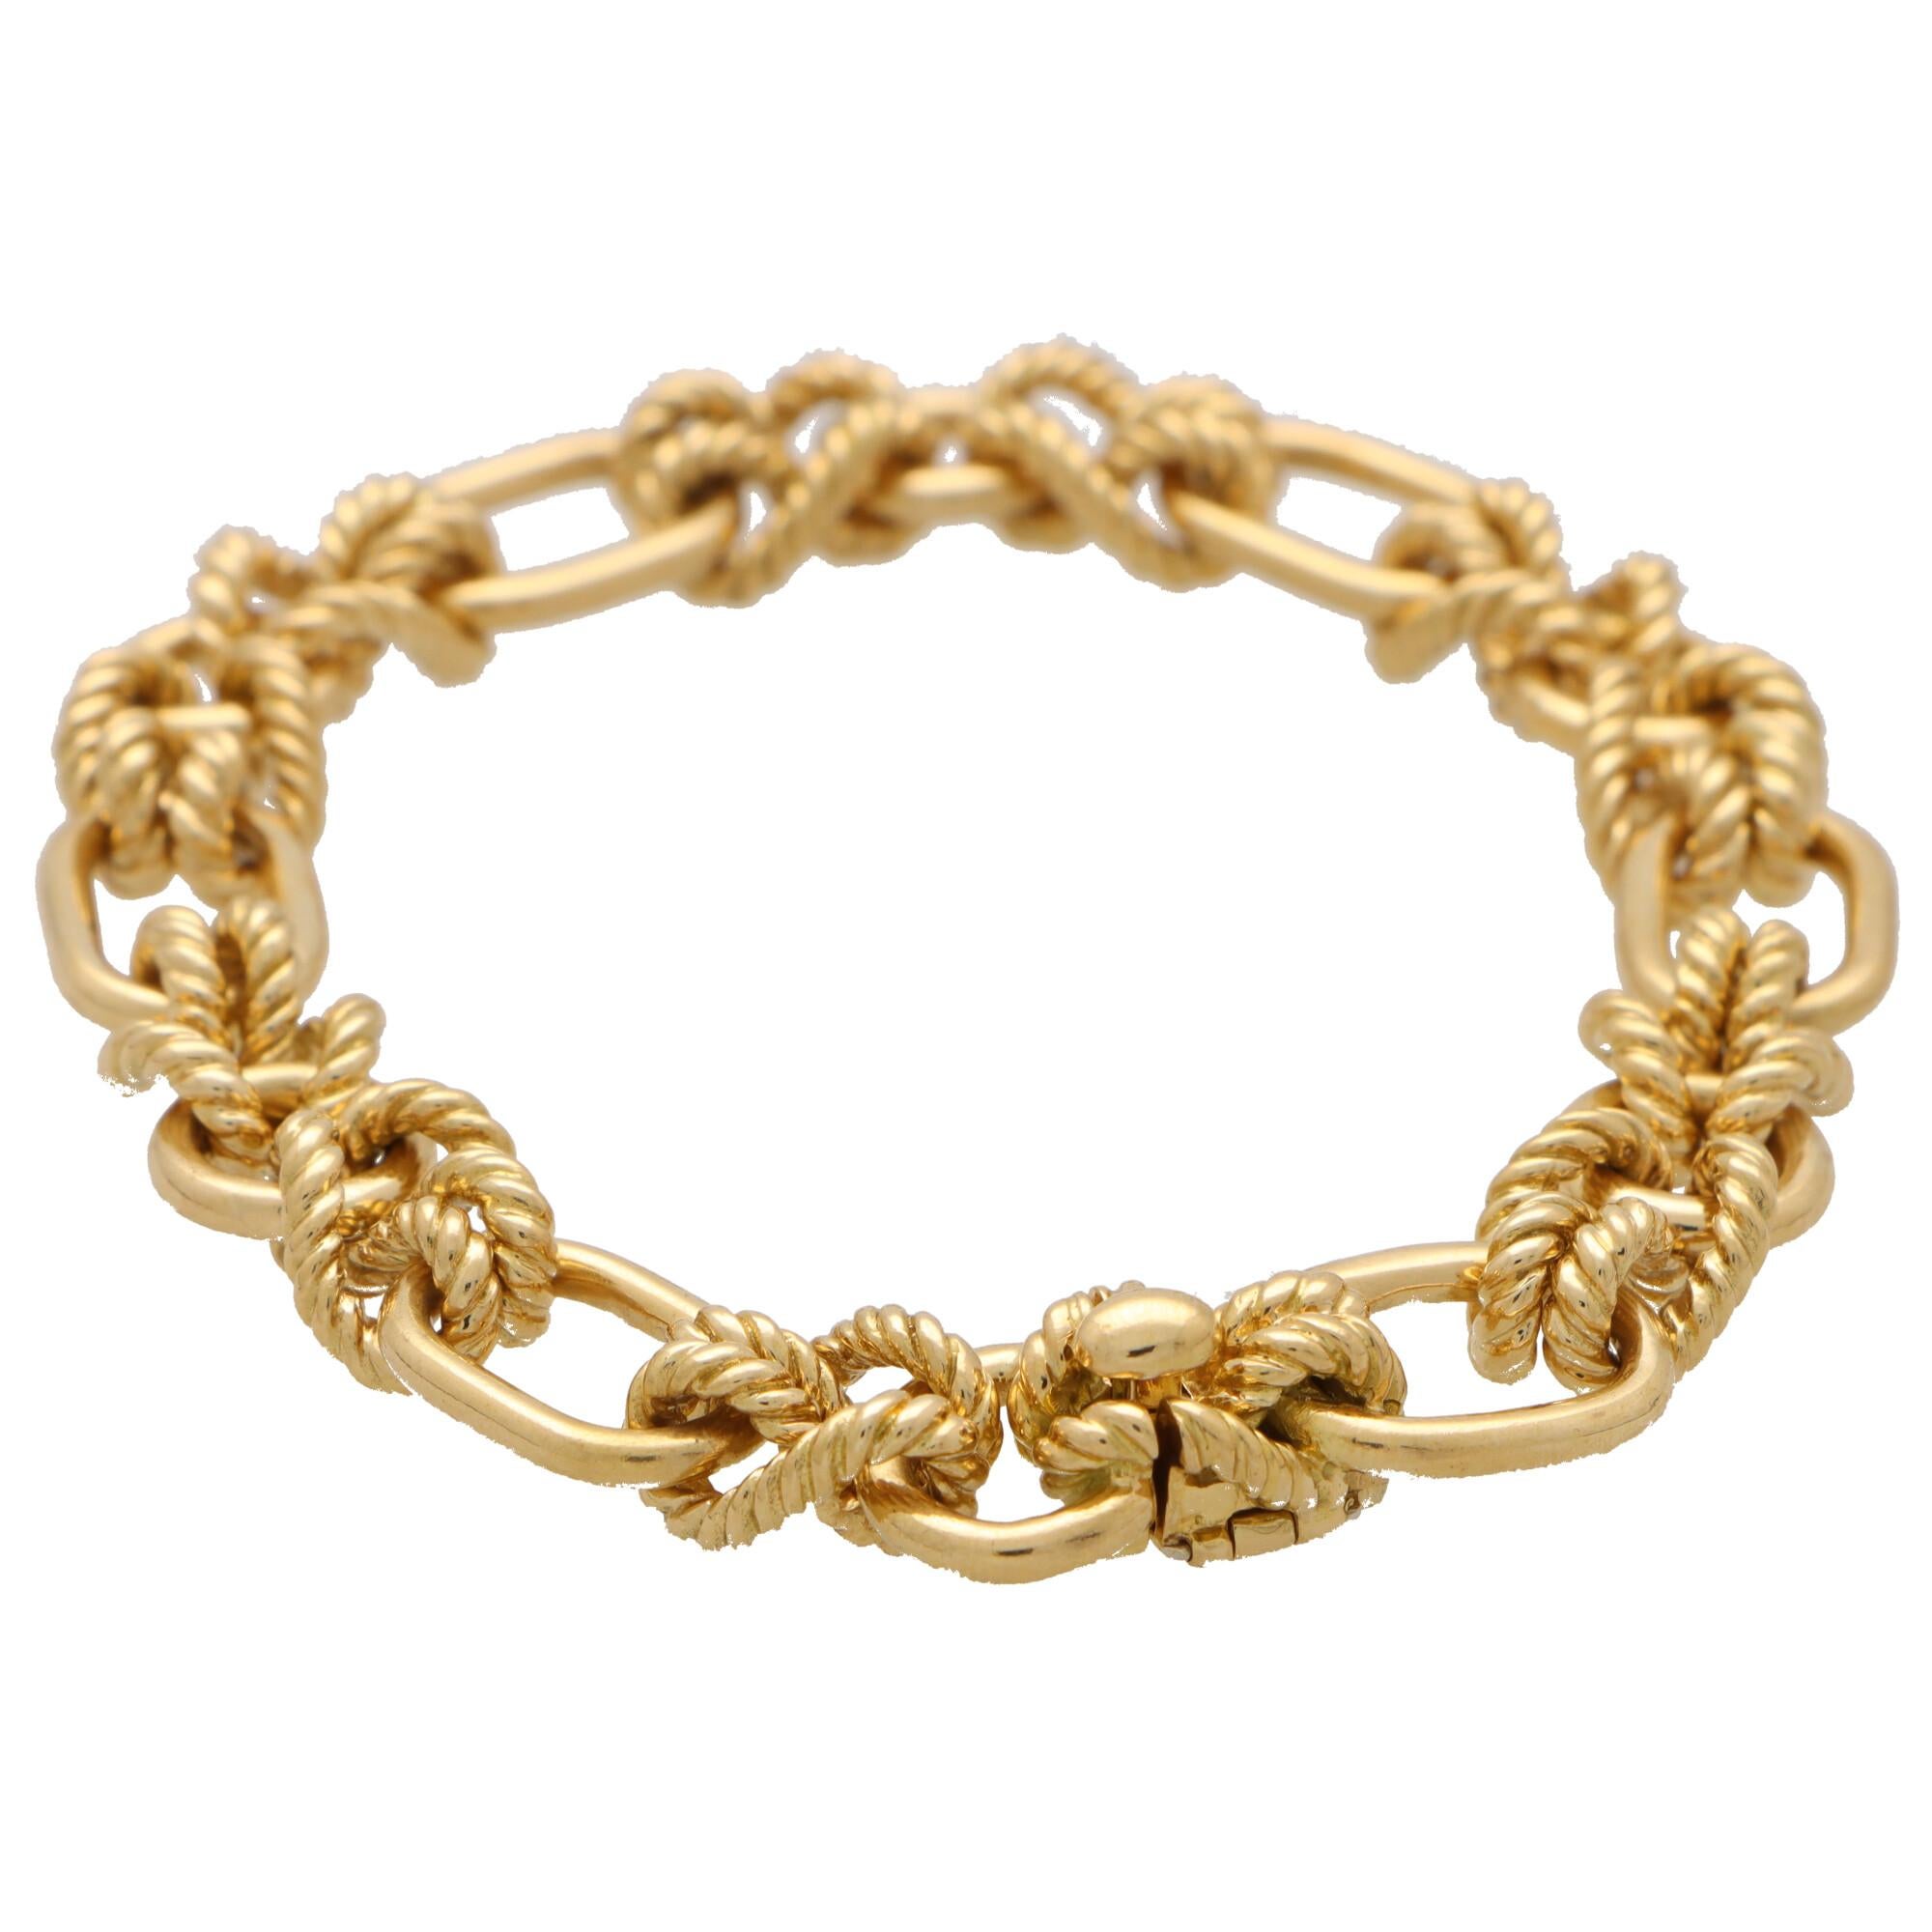 A beautiful vintage Boucheron infinity knot chunky chain link bracelet set in solid 18k yellow gold. 

The bracelet is composed of 12 elongated oval and circular polish solid gold links. These links are all connected by stylised infinity knots which